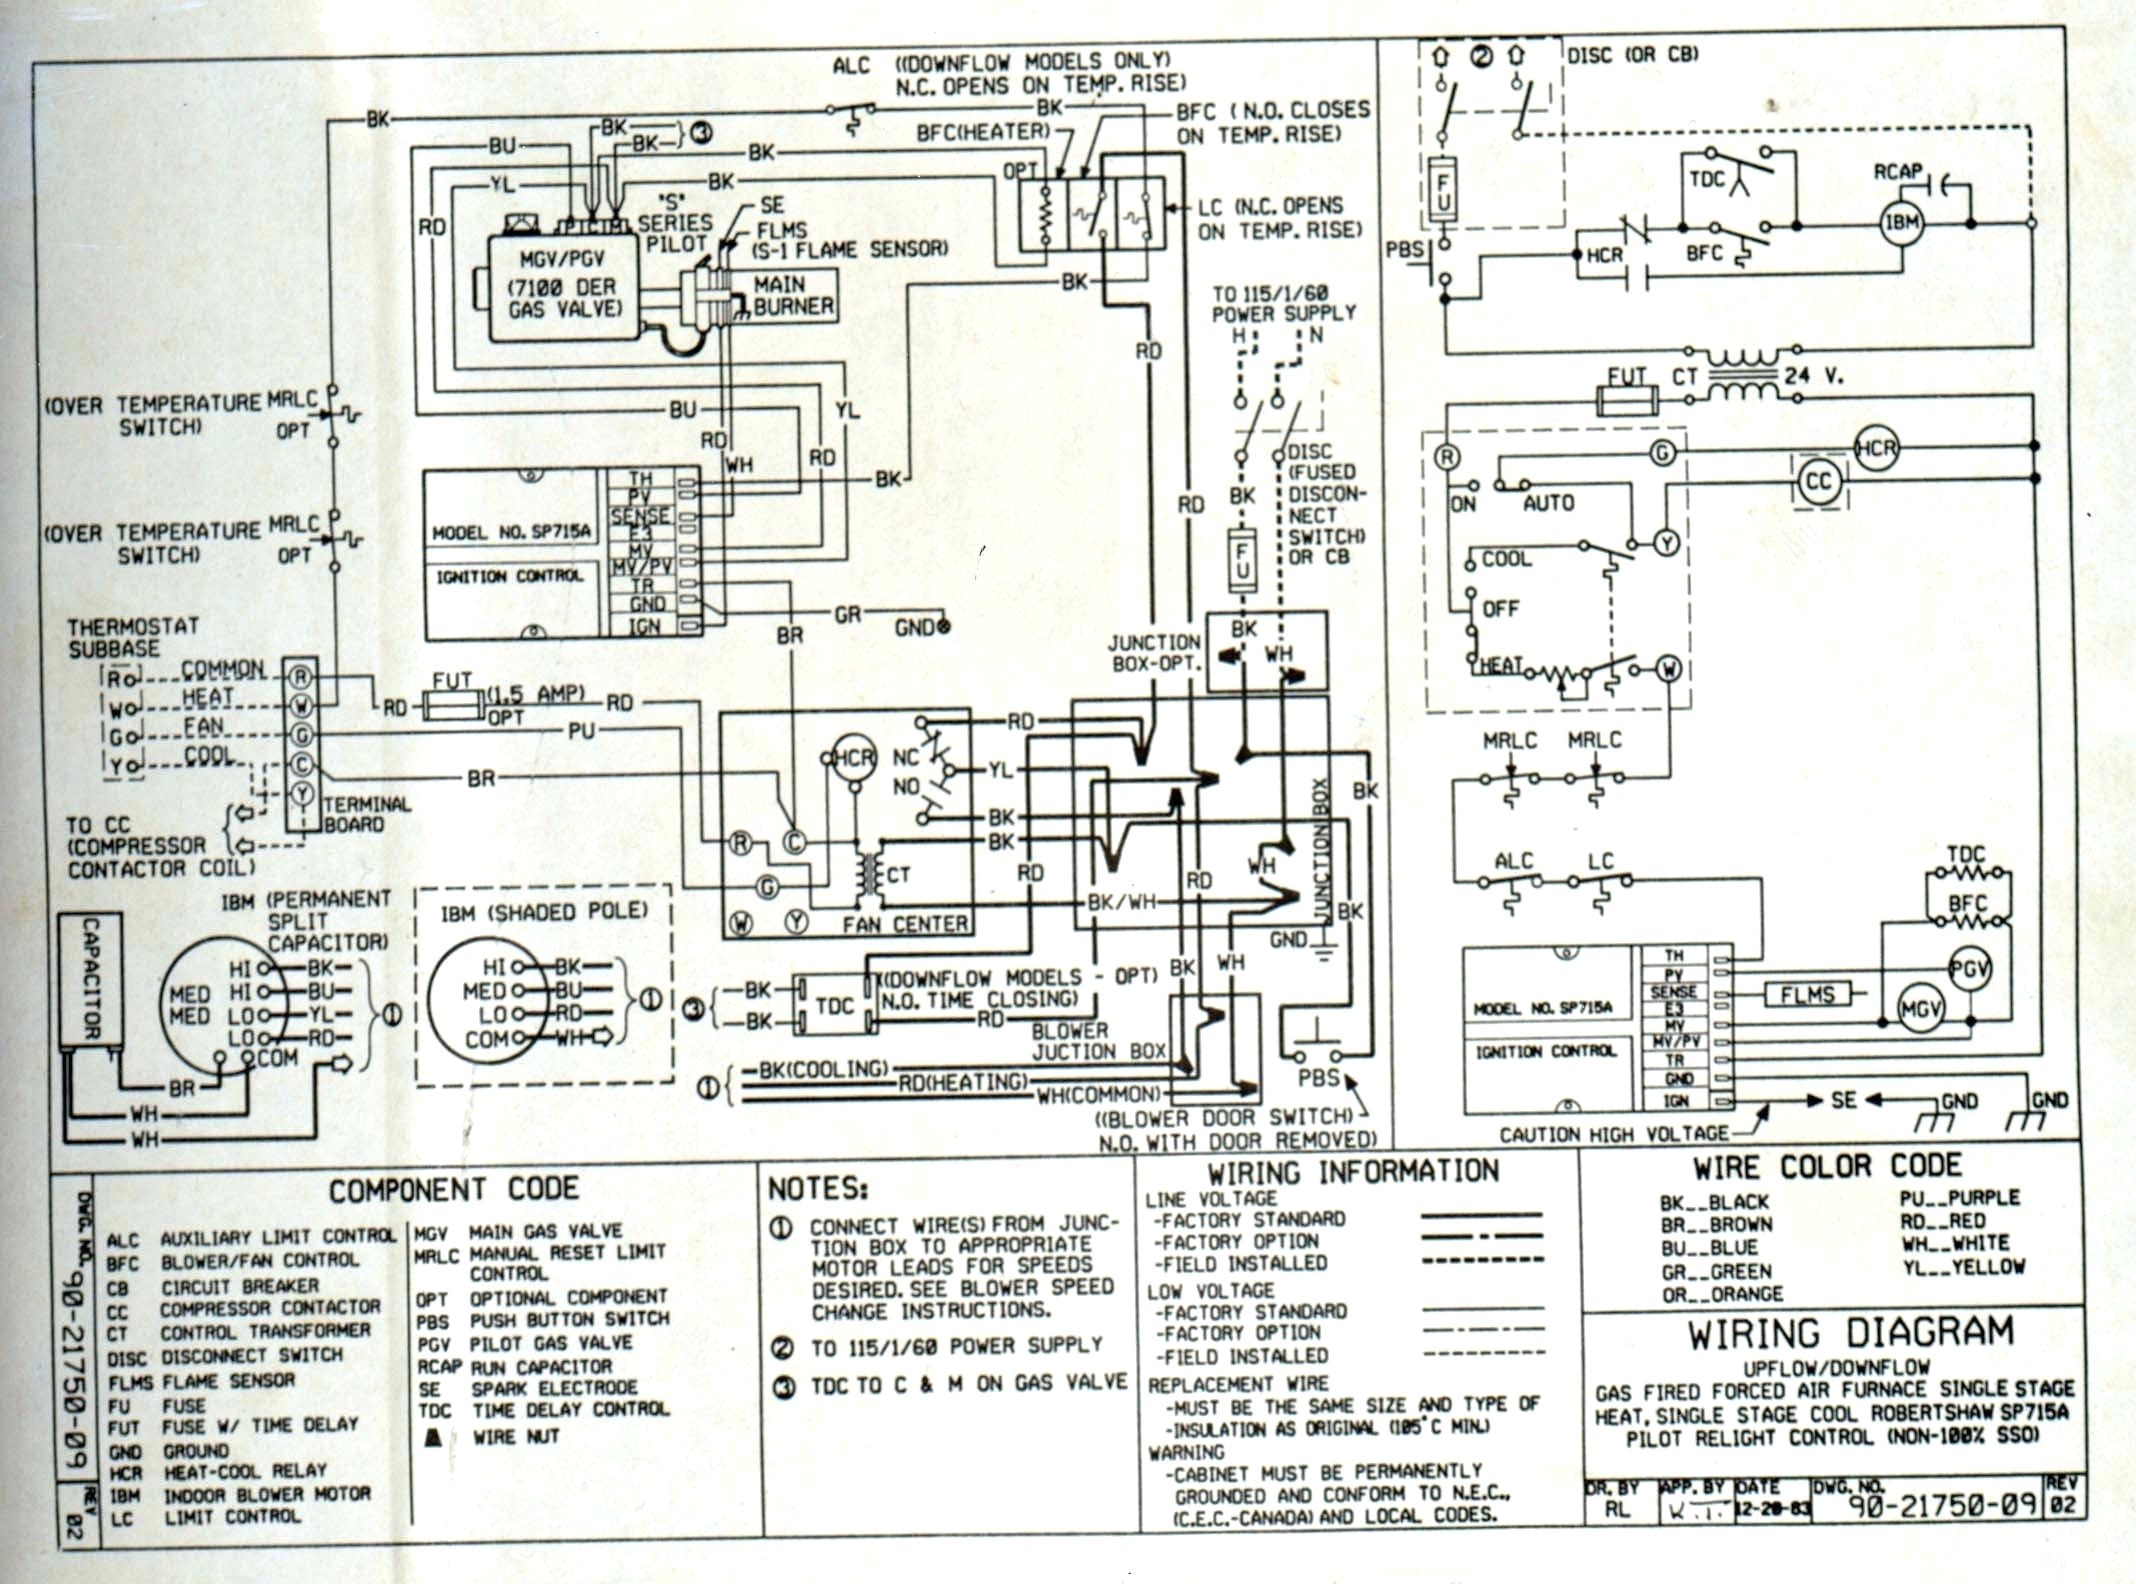 Central Air Conditioner Wiring Diagram Wiring Diagram Ac York Best York Air Conditioner Wiring Diagram